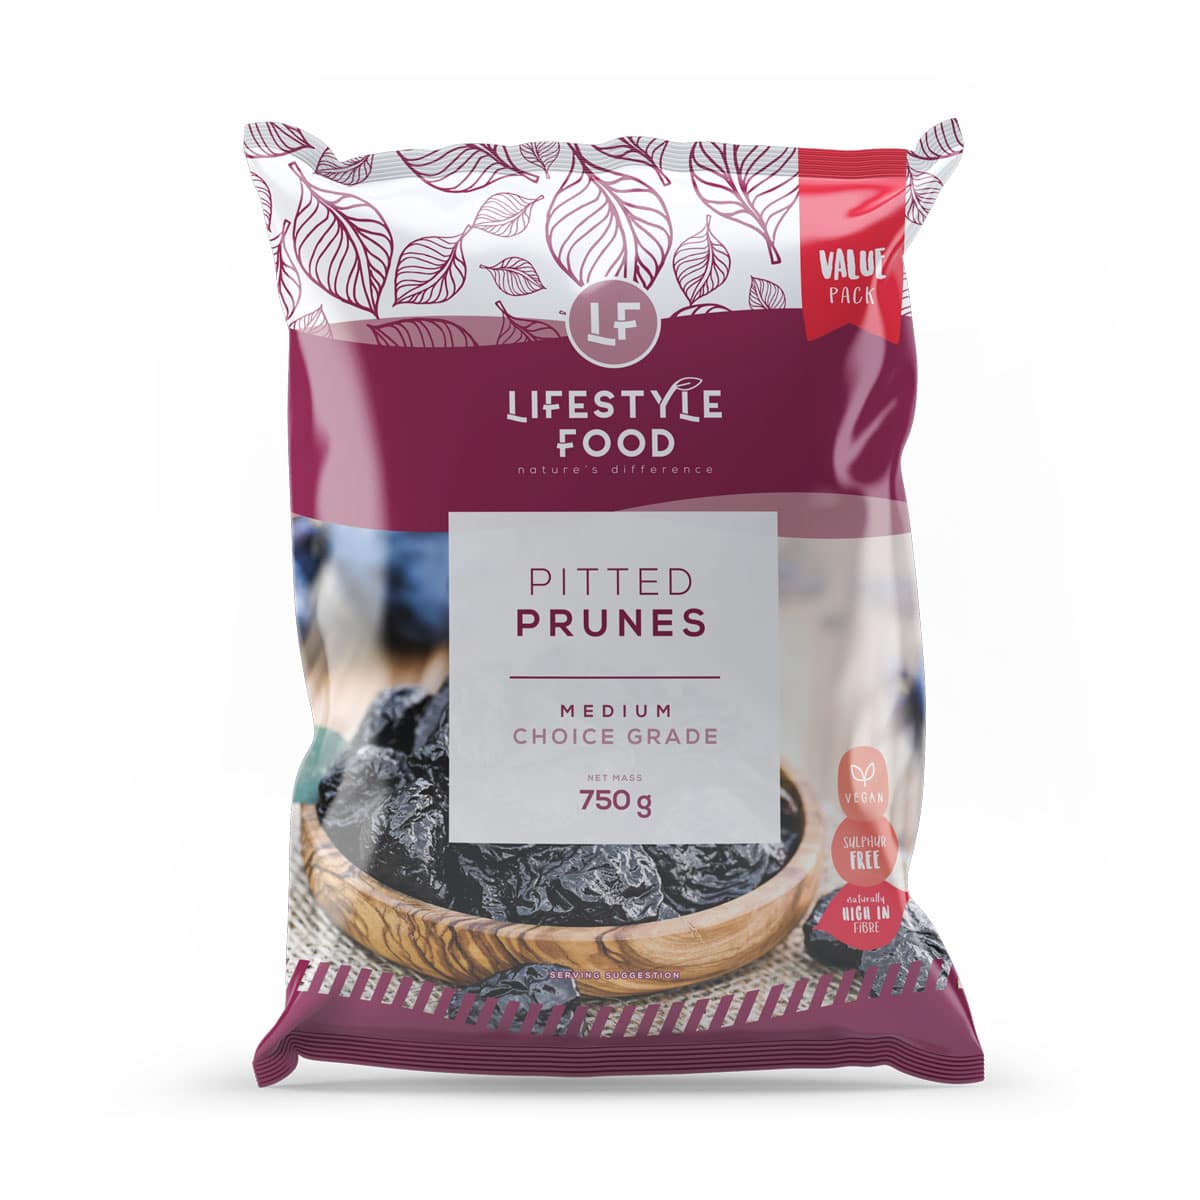 Lifestyle Food Pitted Prunes Value Pack - 750g